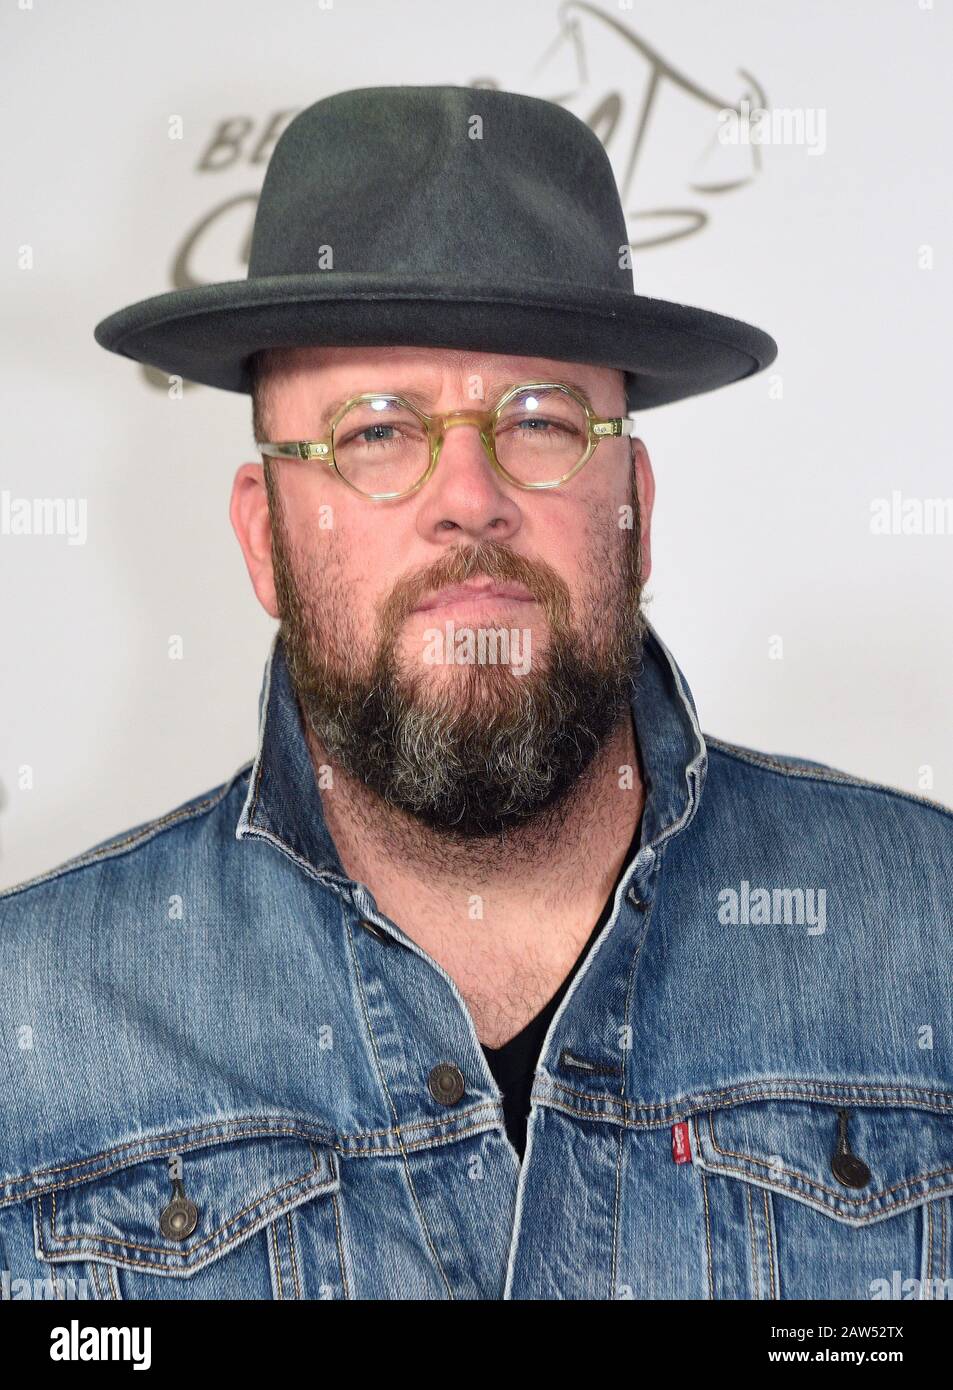 HOLLYWOOD, CALIFORNIA - FEBRUARY 05: Chris Sullivan attends the premiere of AMC's 'Better Call Saul' Season 5 at ArcLight Cinemas on February 05, 2020 in Hollywood, California. Photo: Annie Lesser/imageSPACE/MediaPunch Stock Photo